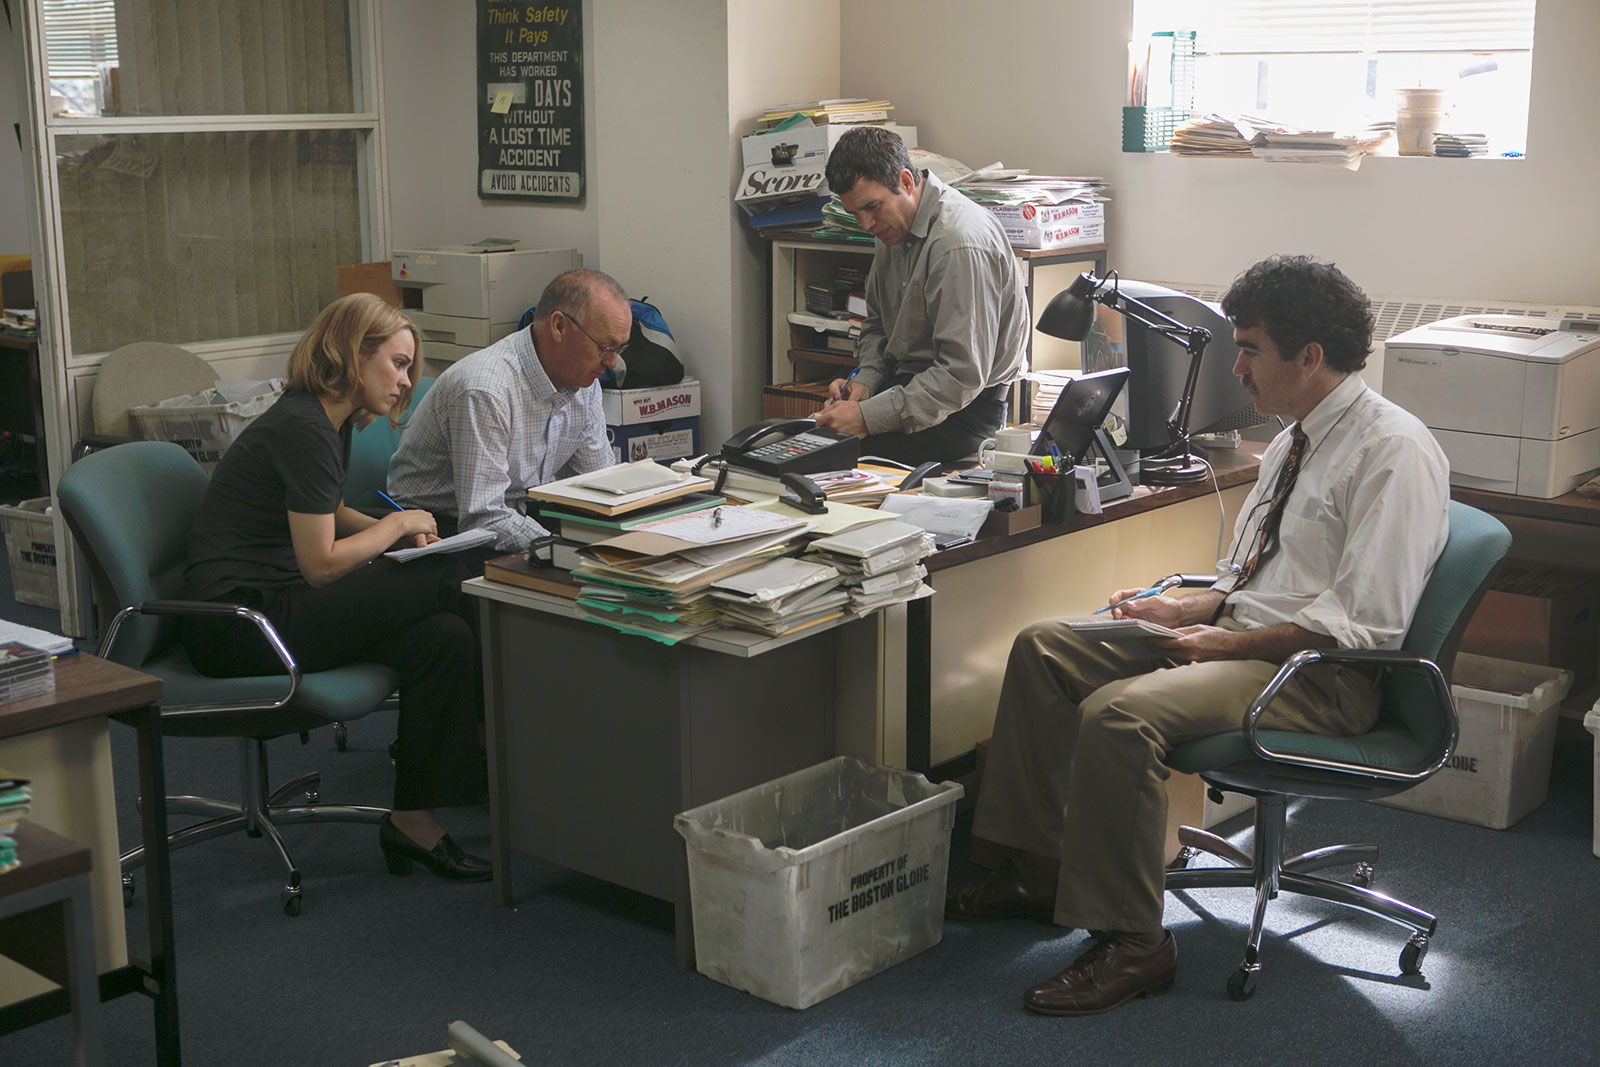 “Spotlight” won Oscars for best picture and best original screenplay. Blye Pagon Faust (in pink), who grew up in Monroe, was a producer for the film.